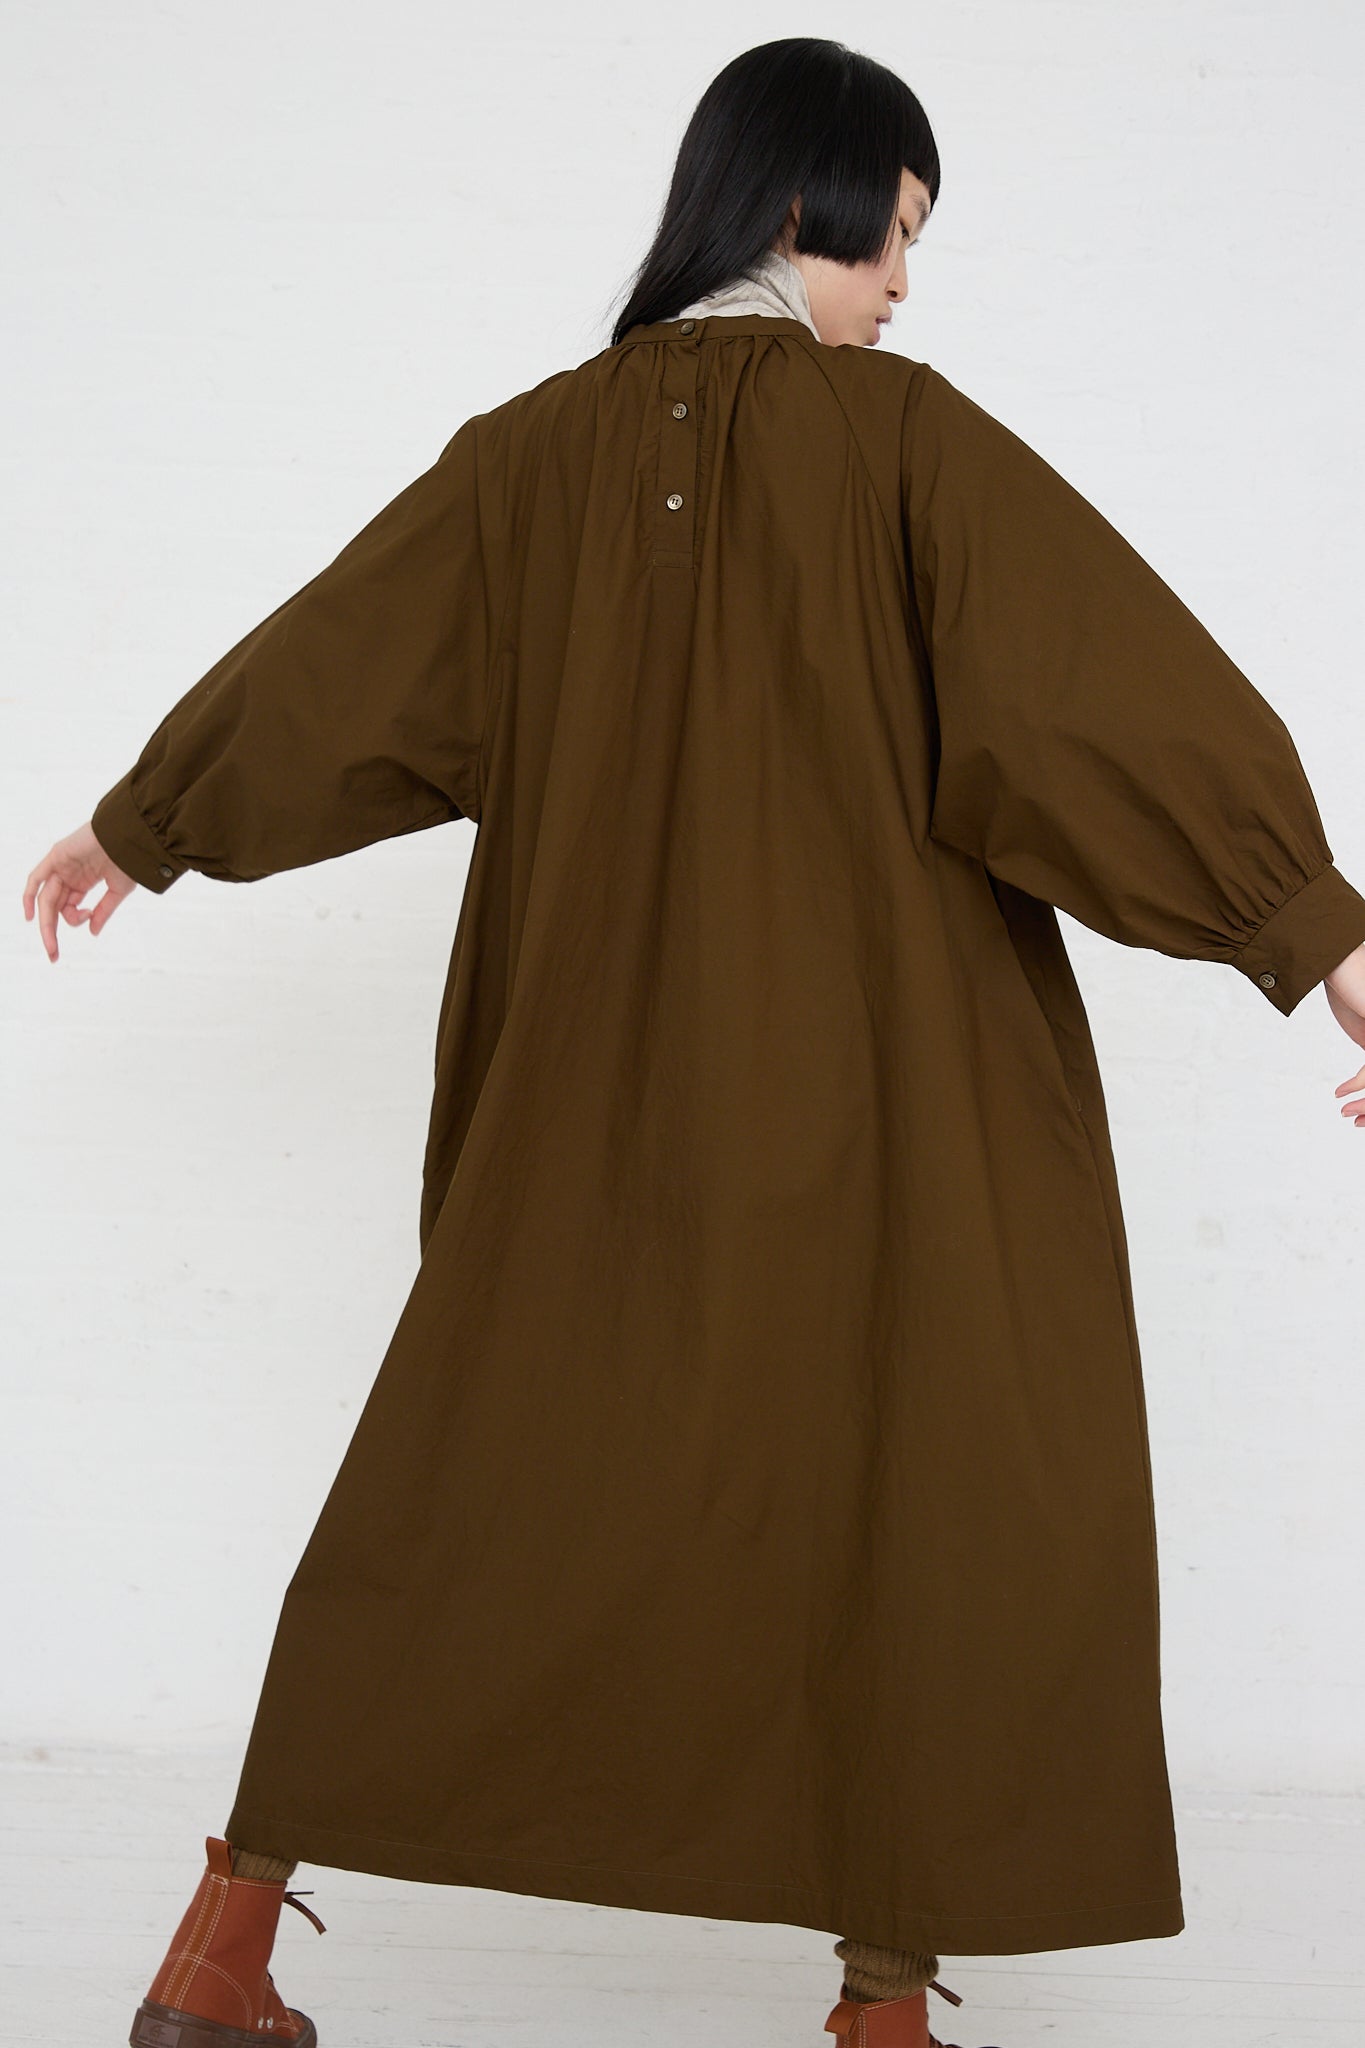 A woman wearing a Ichi Woven Cotton Dress in Seal Brown and boots. Back view.